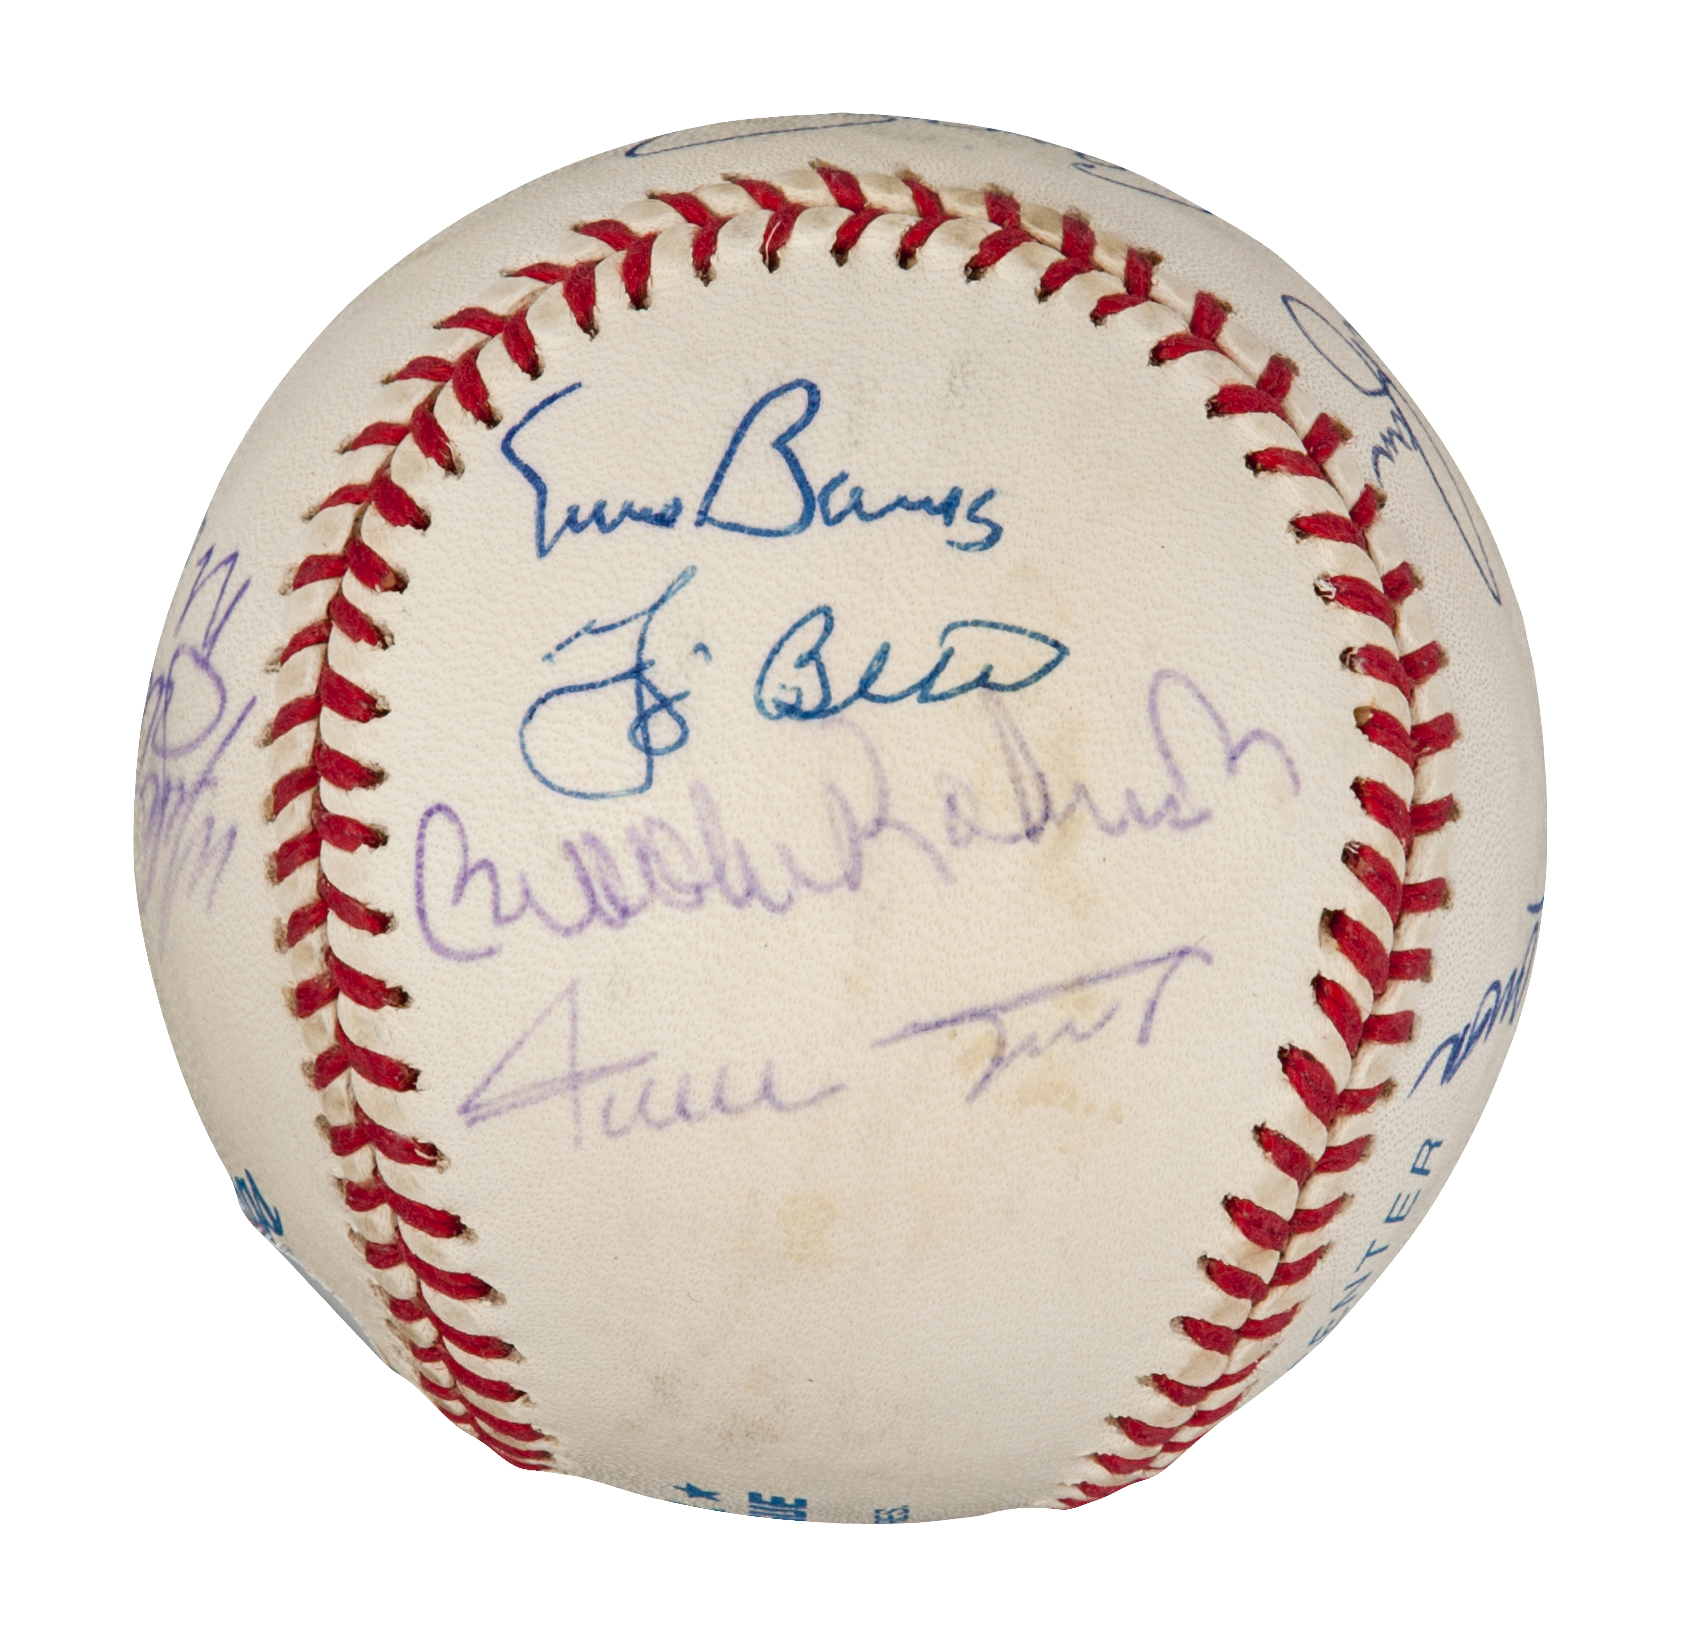 Lot Detail - All-Century Team Multi-Signed Baseball With 12 Signatures (PSA)1683 x 1643